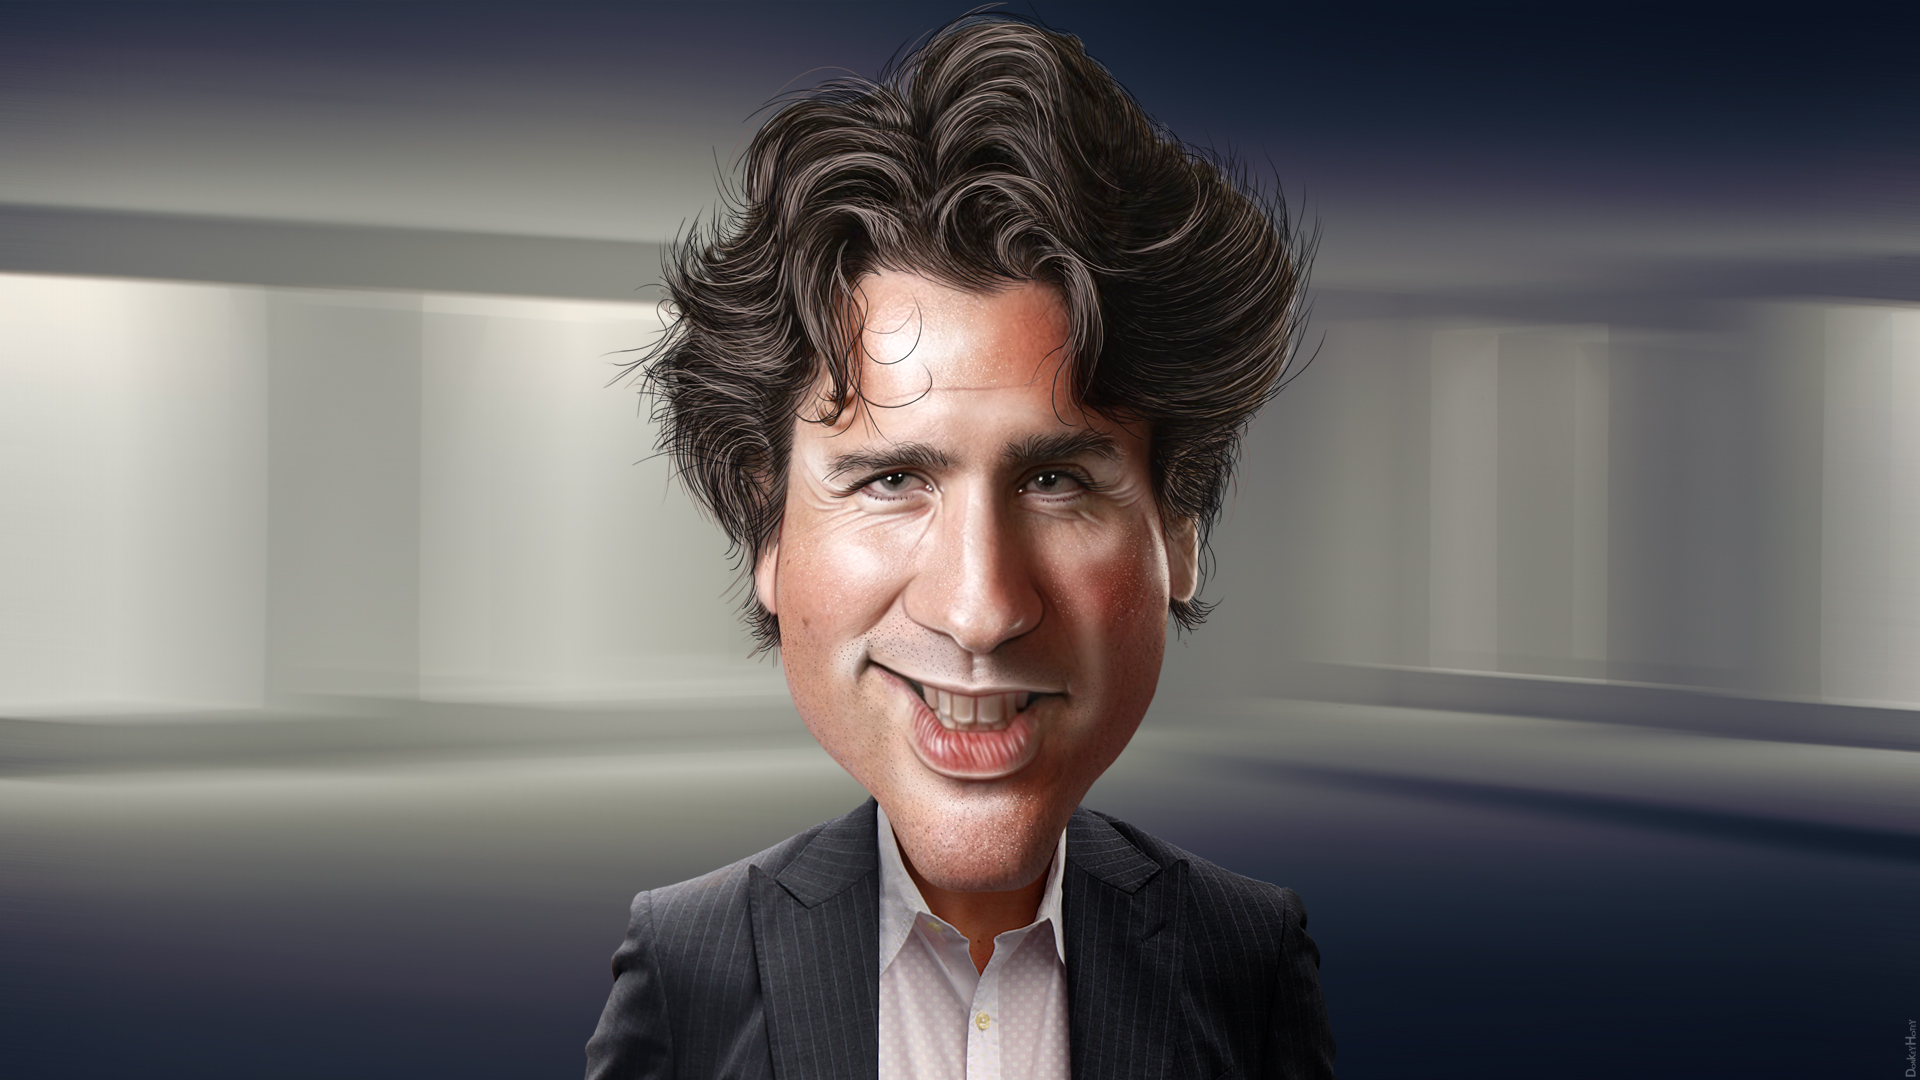 this digital painting of a businessman has an excited look